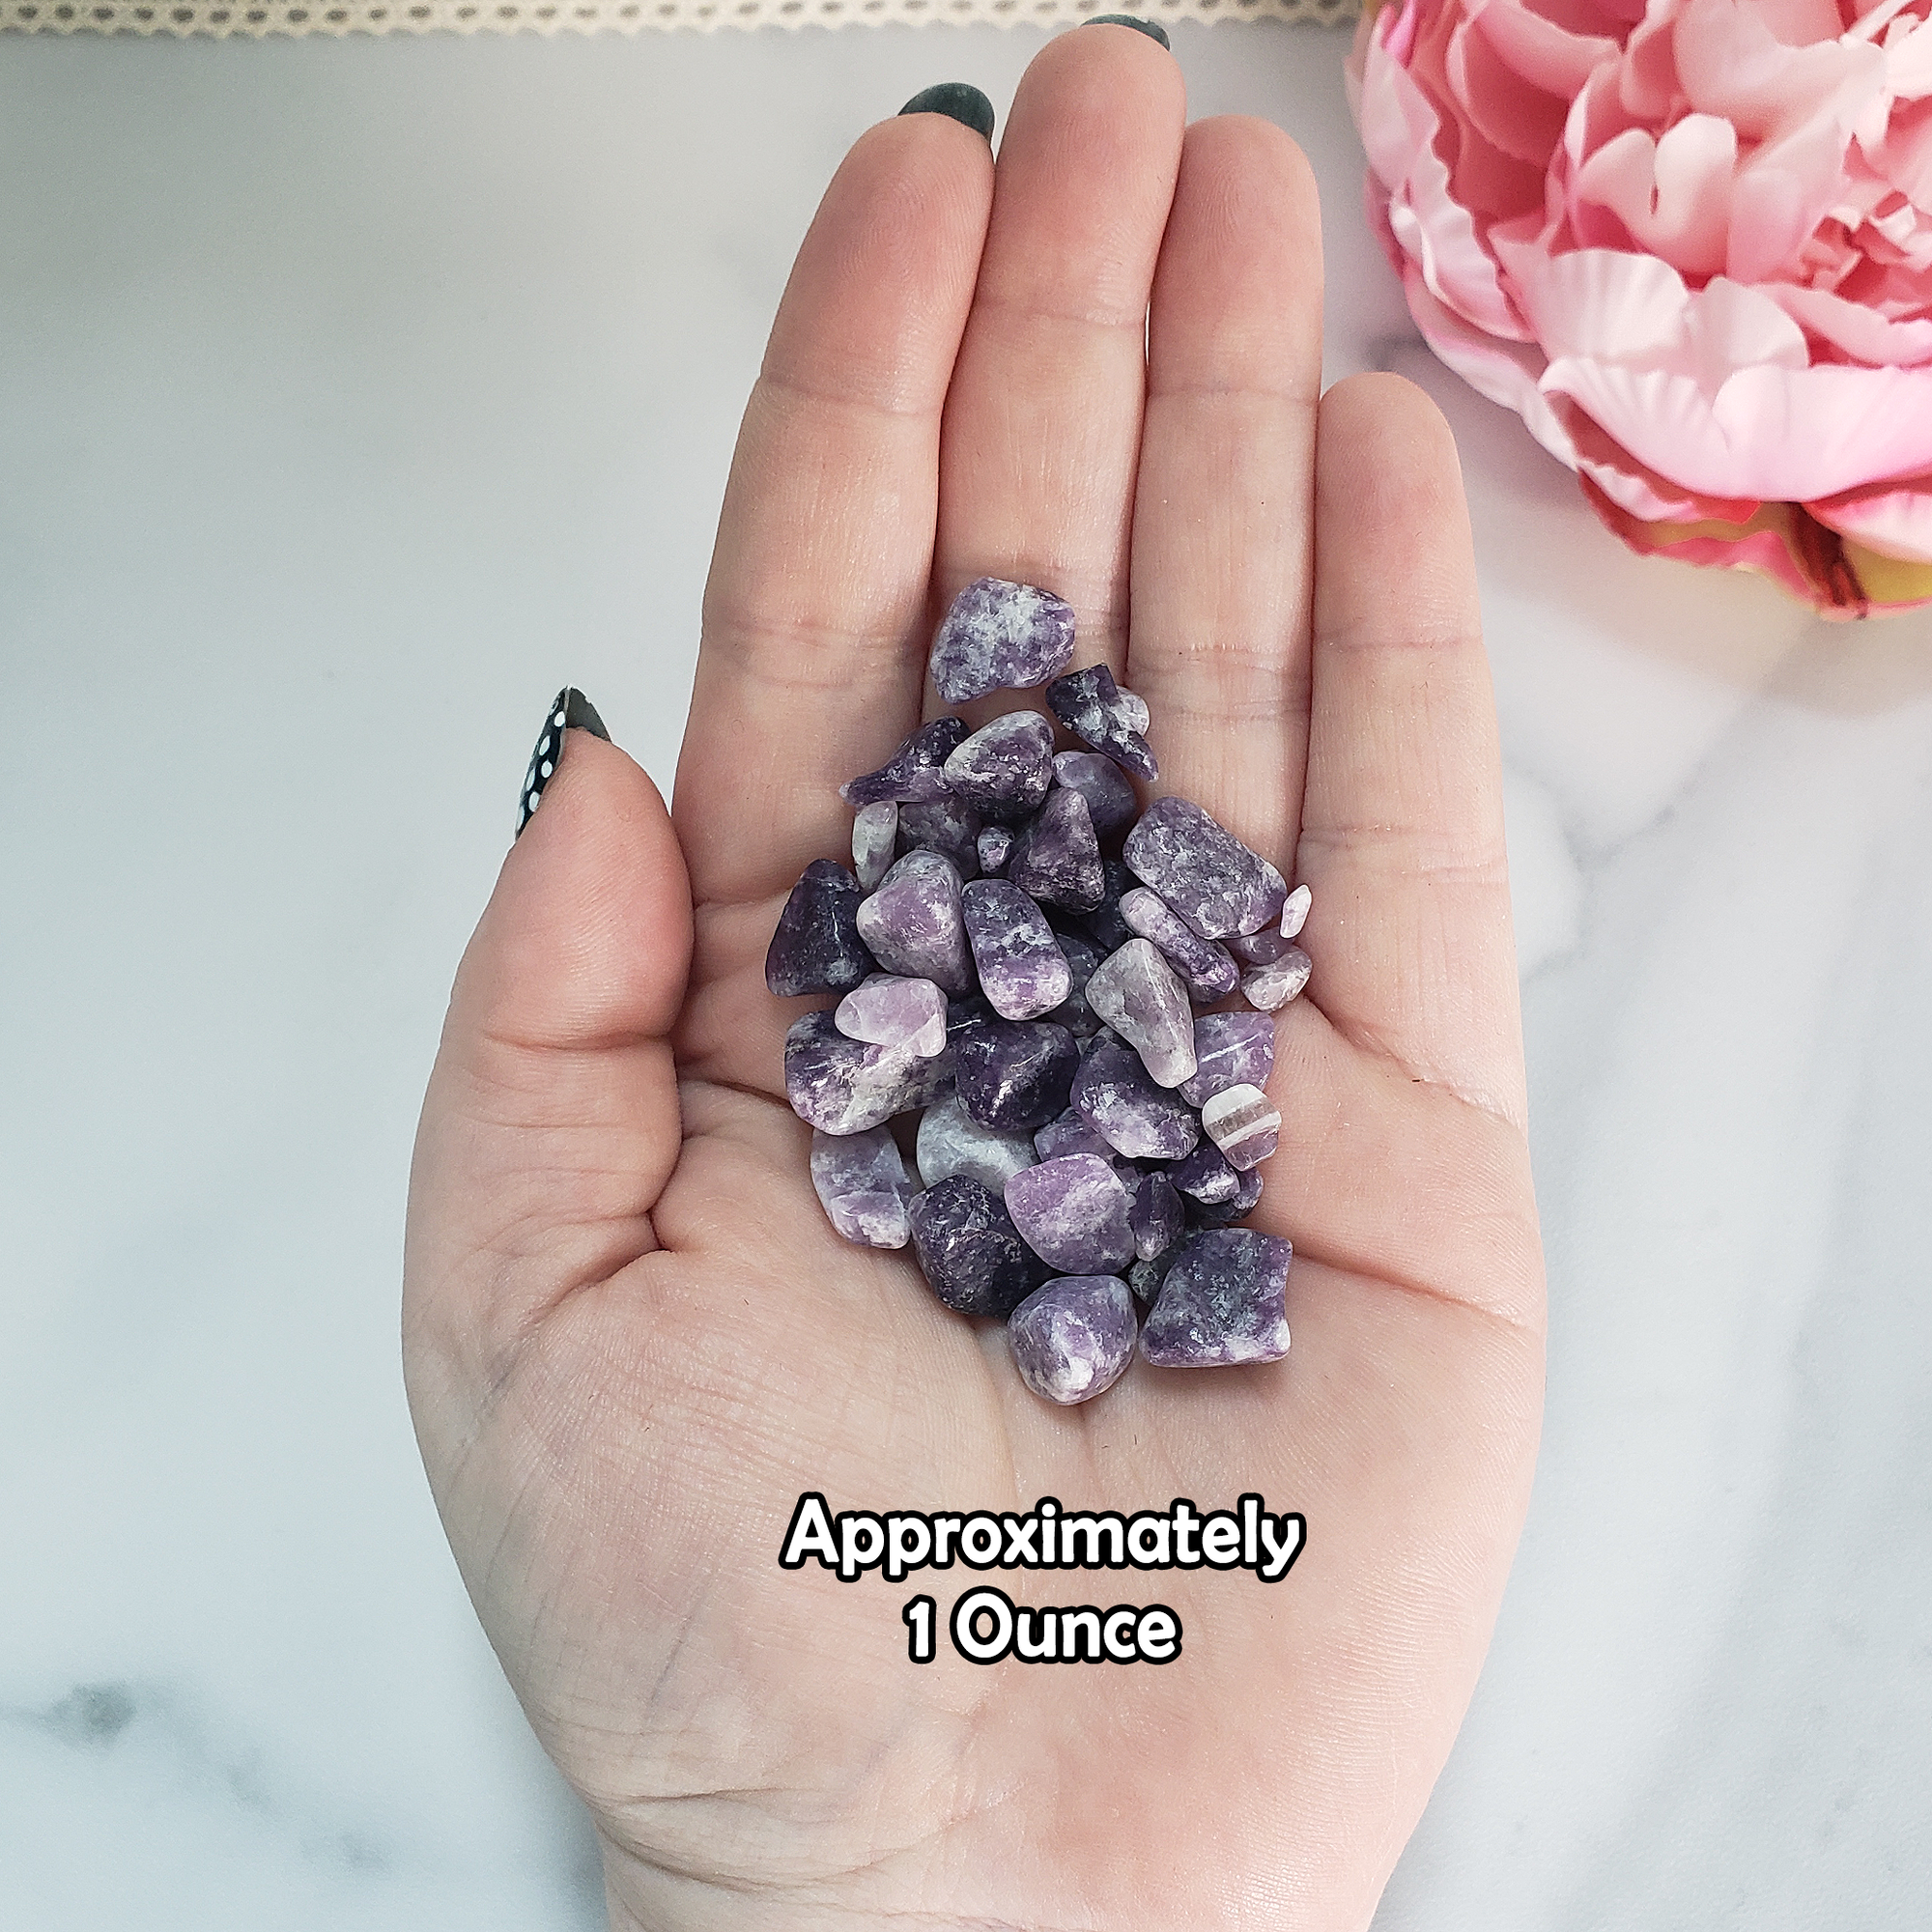 Lepidolite Natural Gemstone Chips By the Ounce - One Ounce of Gemstone Chips in Hand